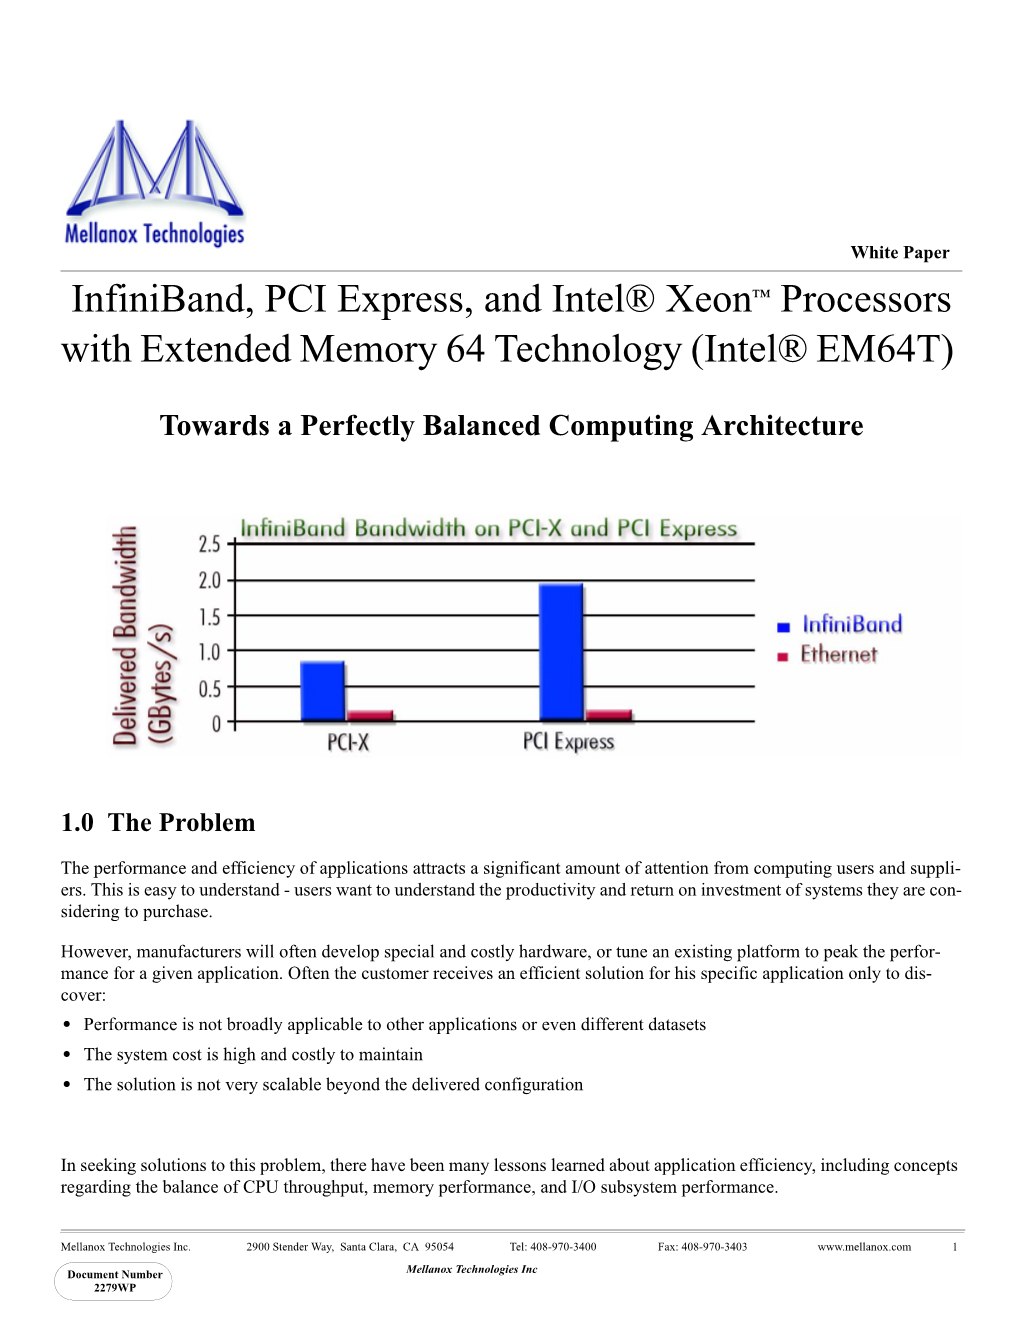 Infiniband, PCI Express, and Intel® Xeon™ Processors with Extended Memory 64 Technology (Intel® EM64T)